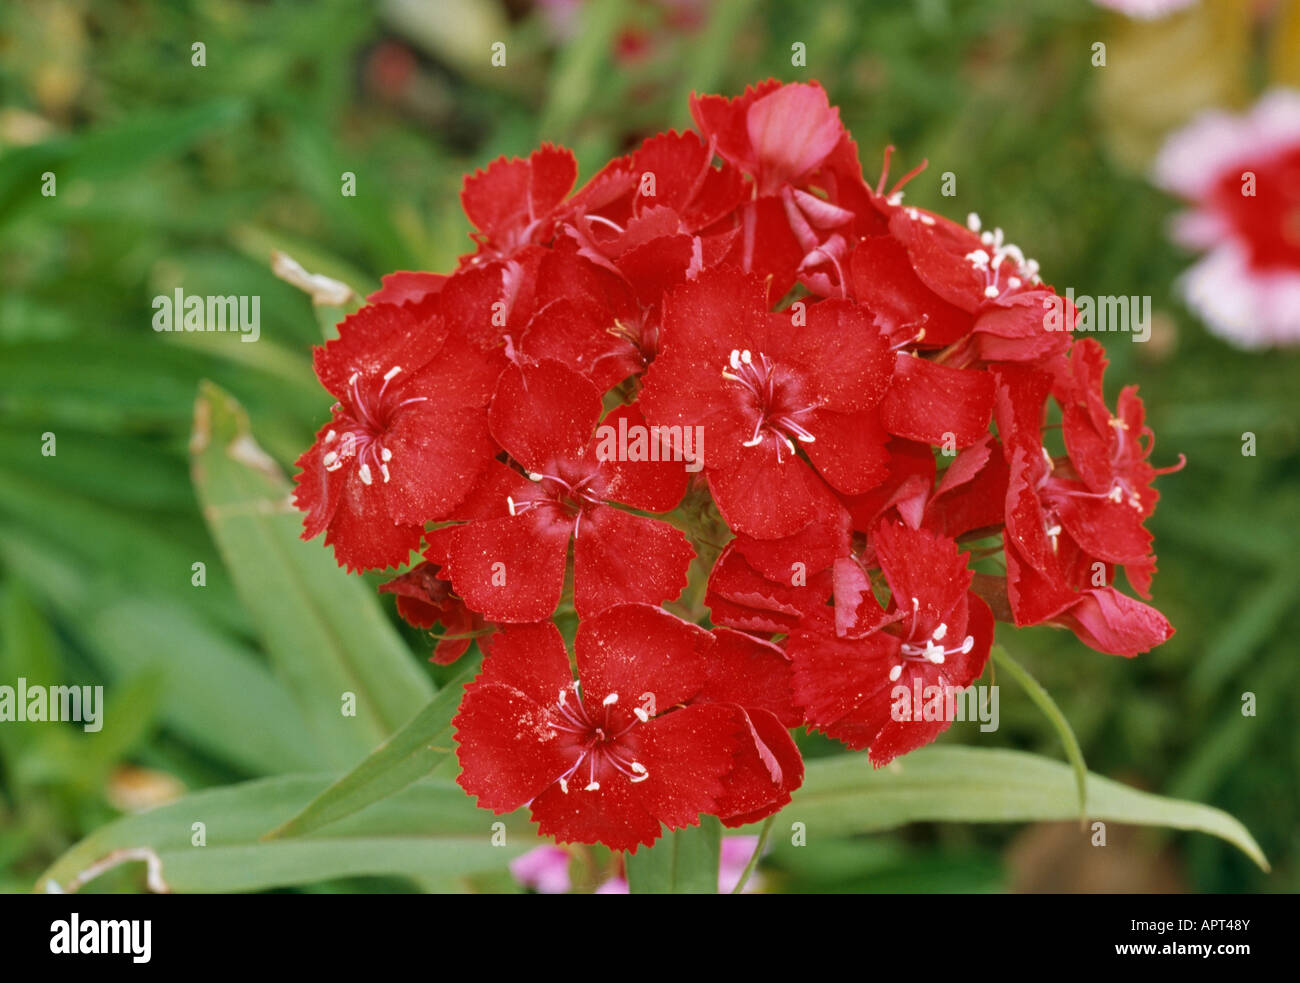 Dianthus barbatus red dense cluster of sweet smelling delicate flower Stock Photo